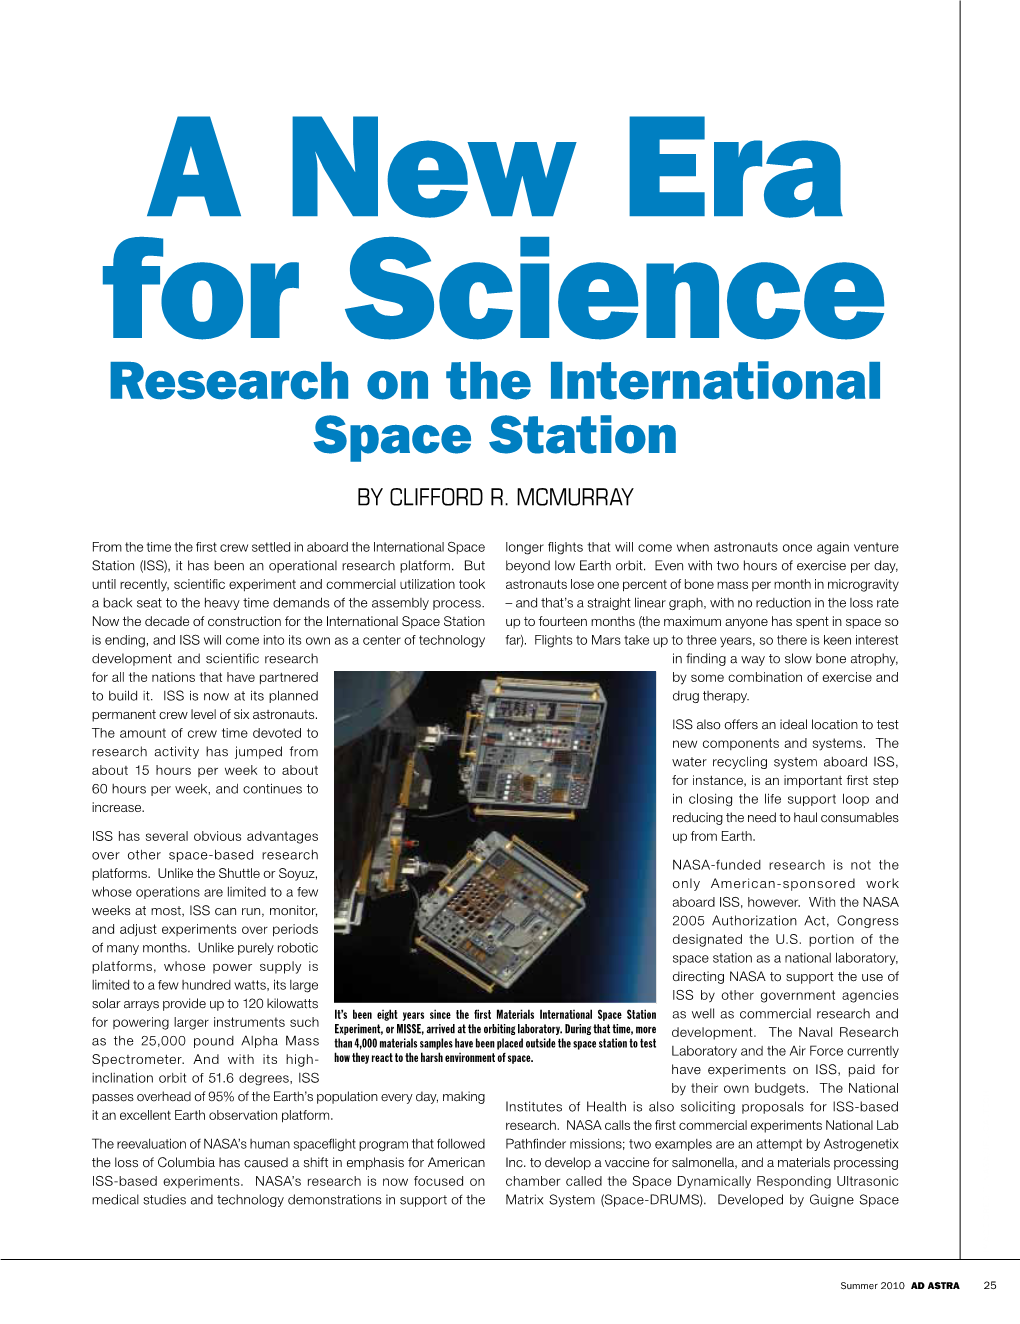 Research on the International Space Station by Clifford R